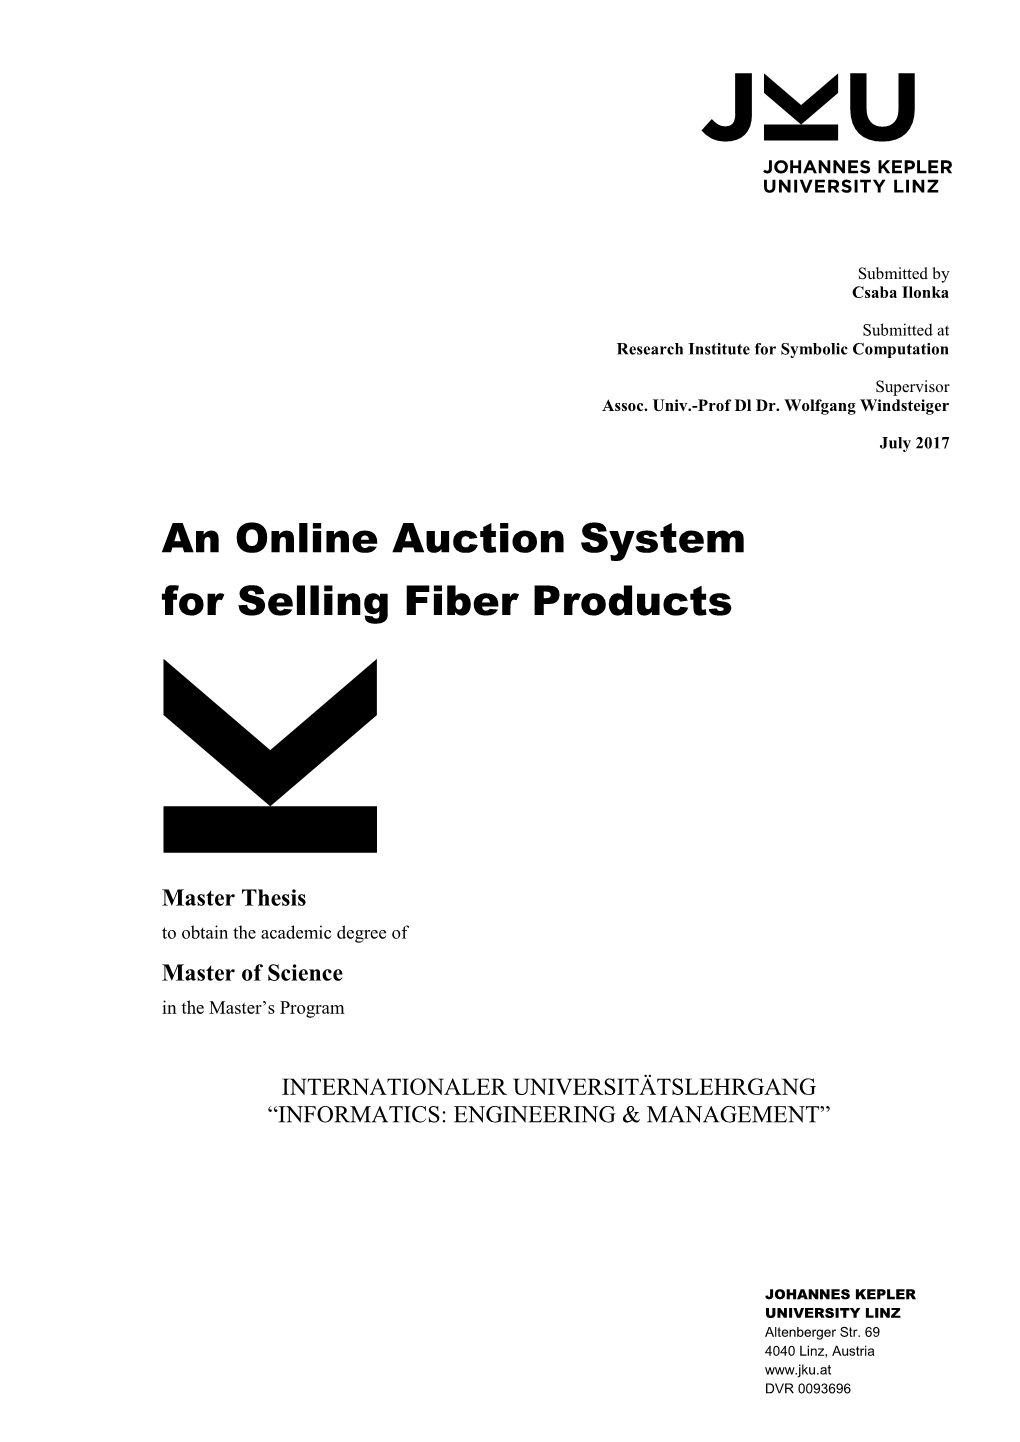 An Online Auction System for Selling Fiber Products